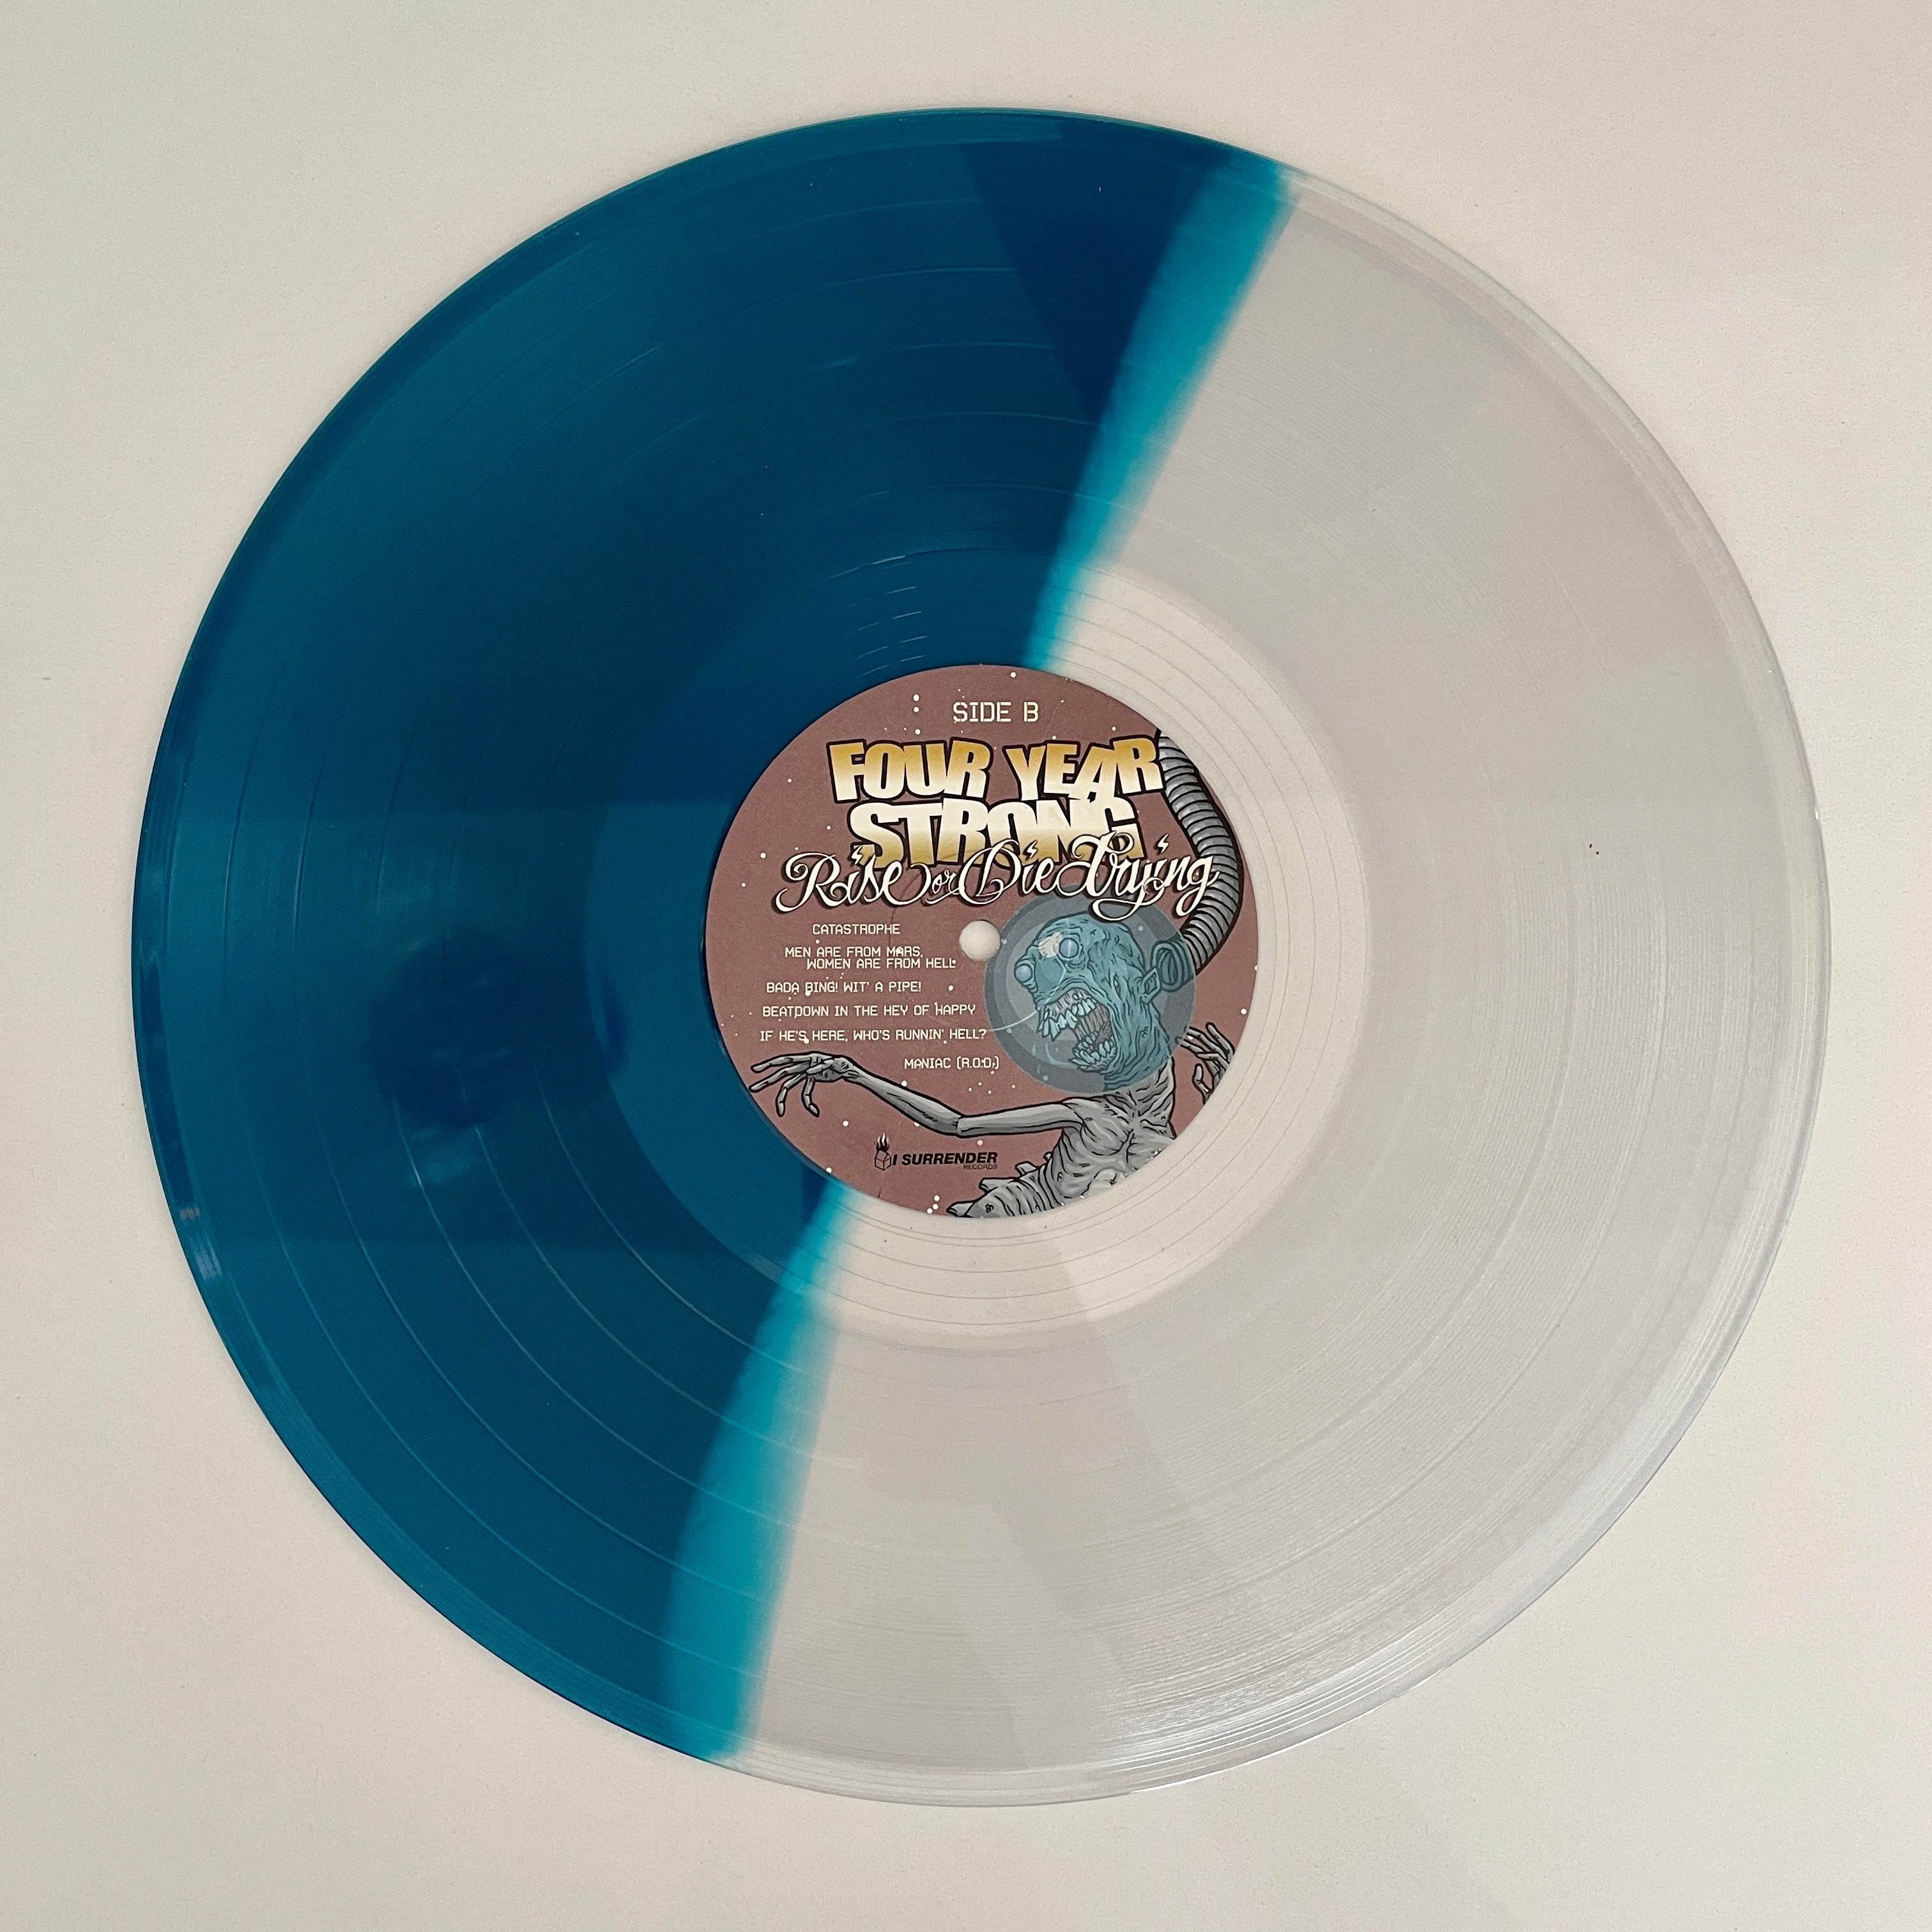 Rise or Die Trying Vinyl (Ultra Clear/Transparent Sea Blue)